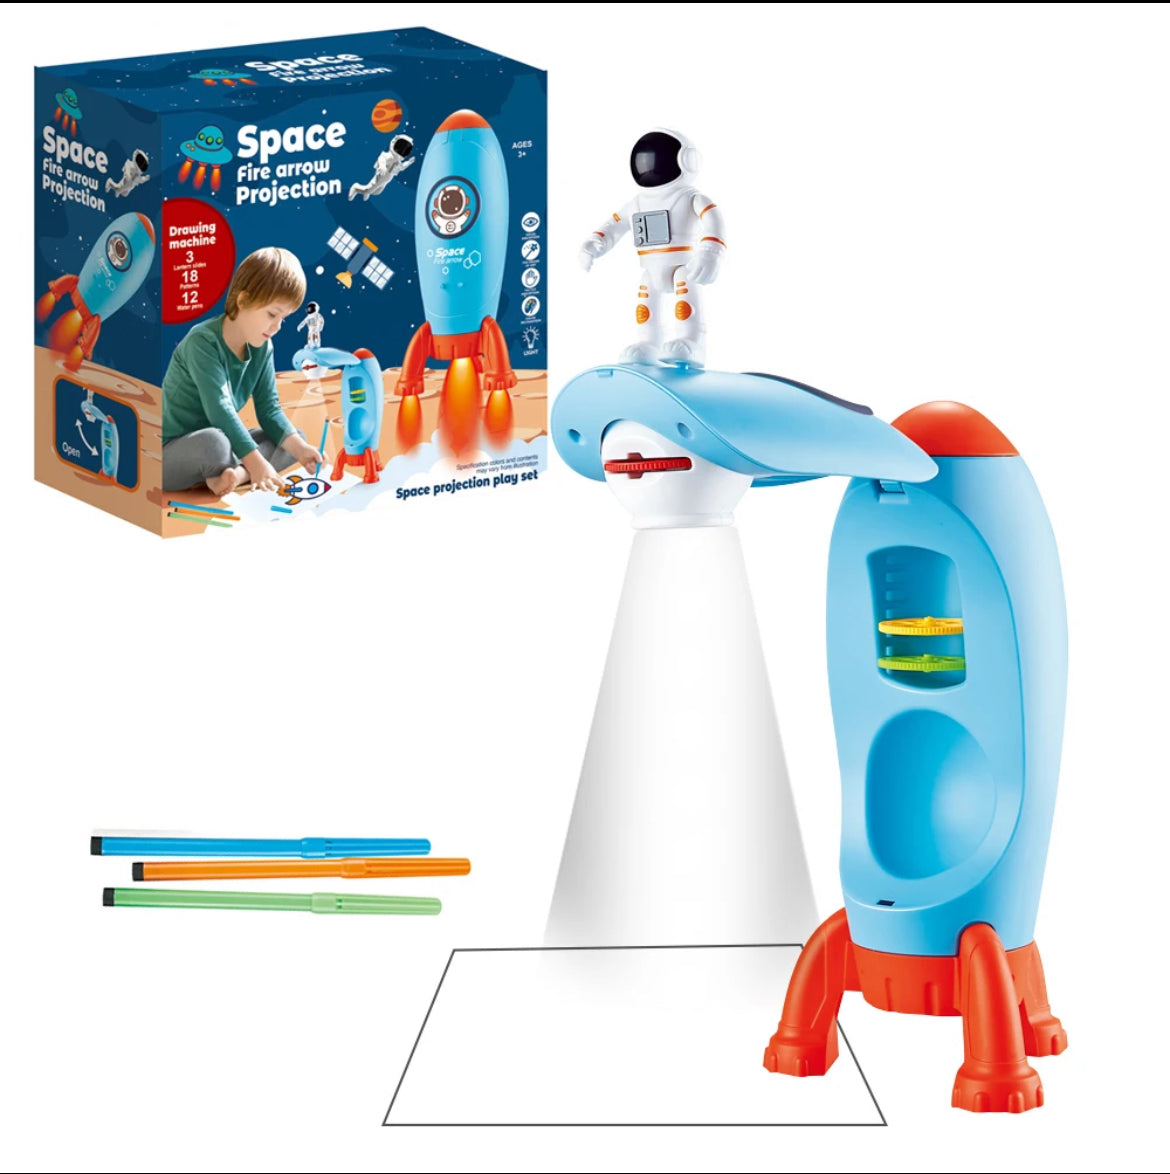 Space fire arrow projector, accurate and the best drawings for your tots - Kidspark